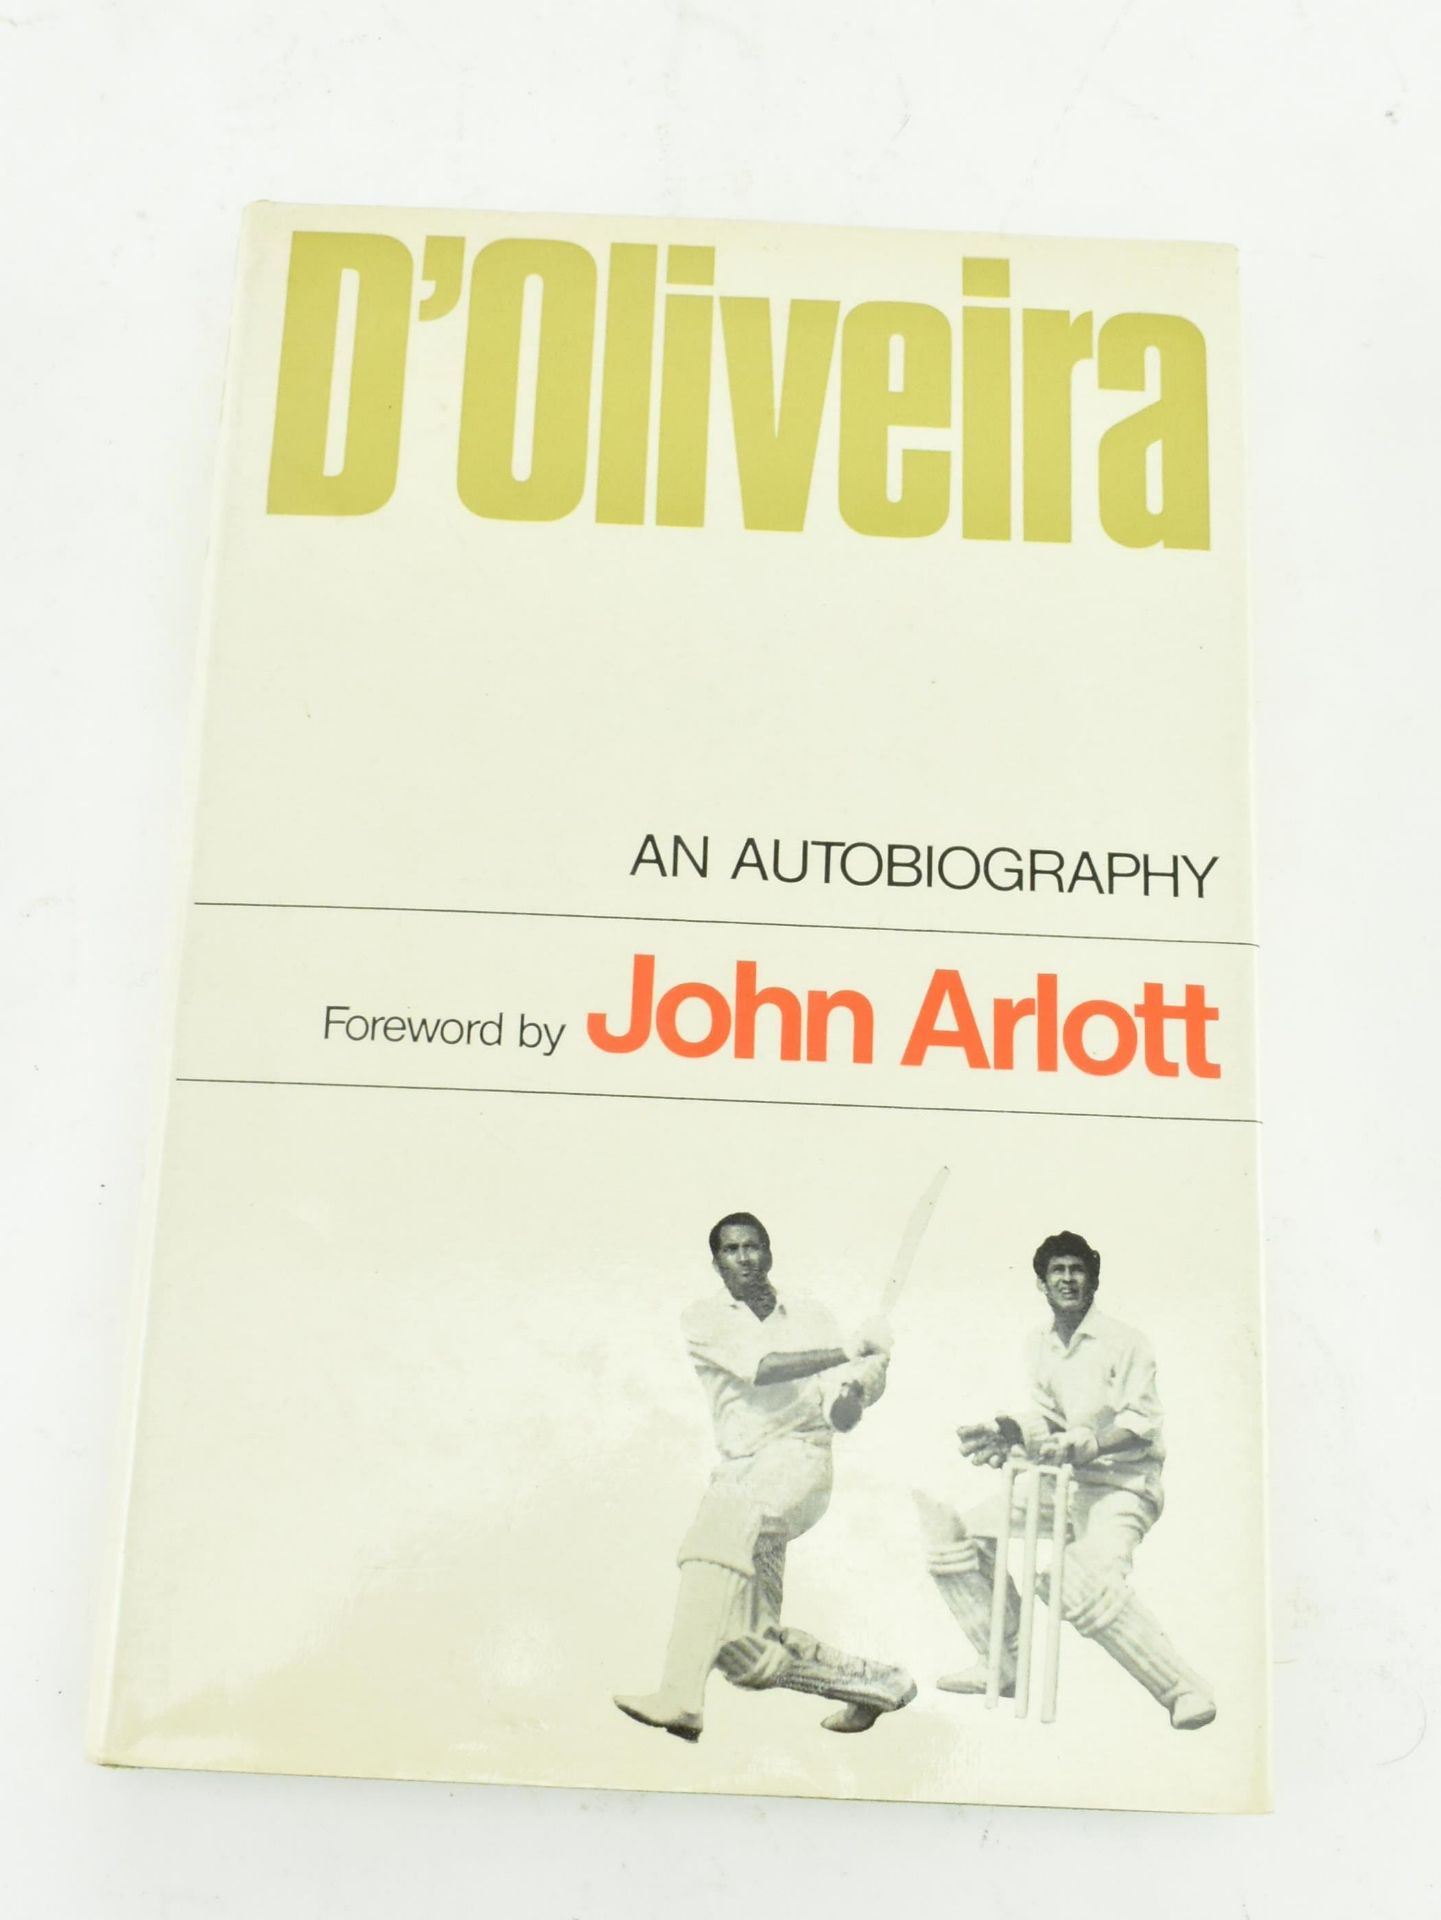 CRICKET. COLLECTION OF HARDBACK BOOKS, MOSTLY FIRST EDITIONS - Image 8 of 8